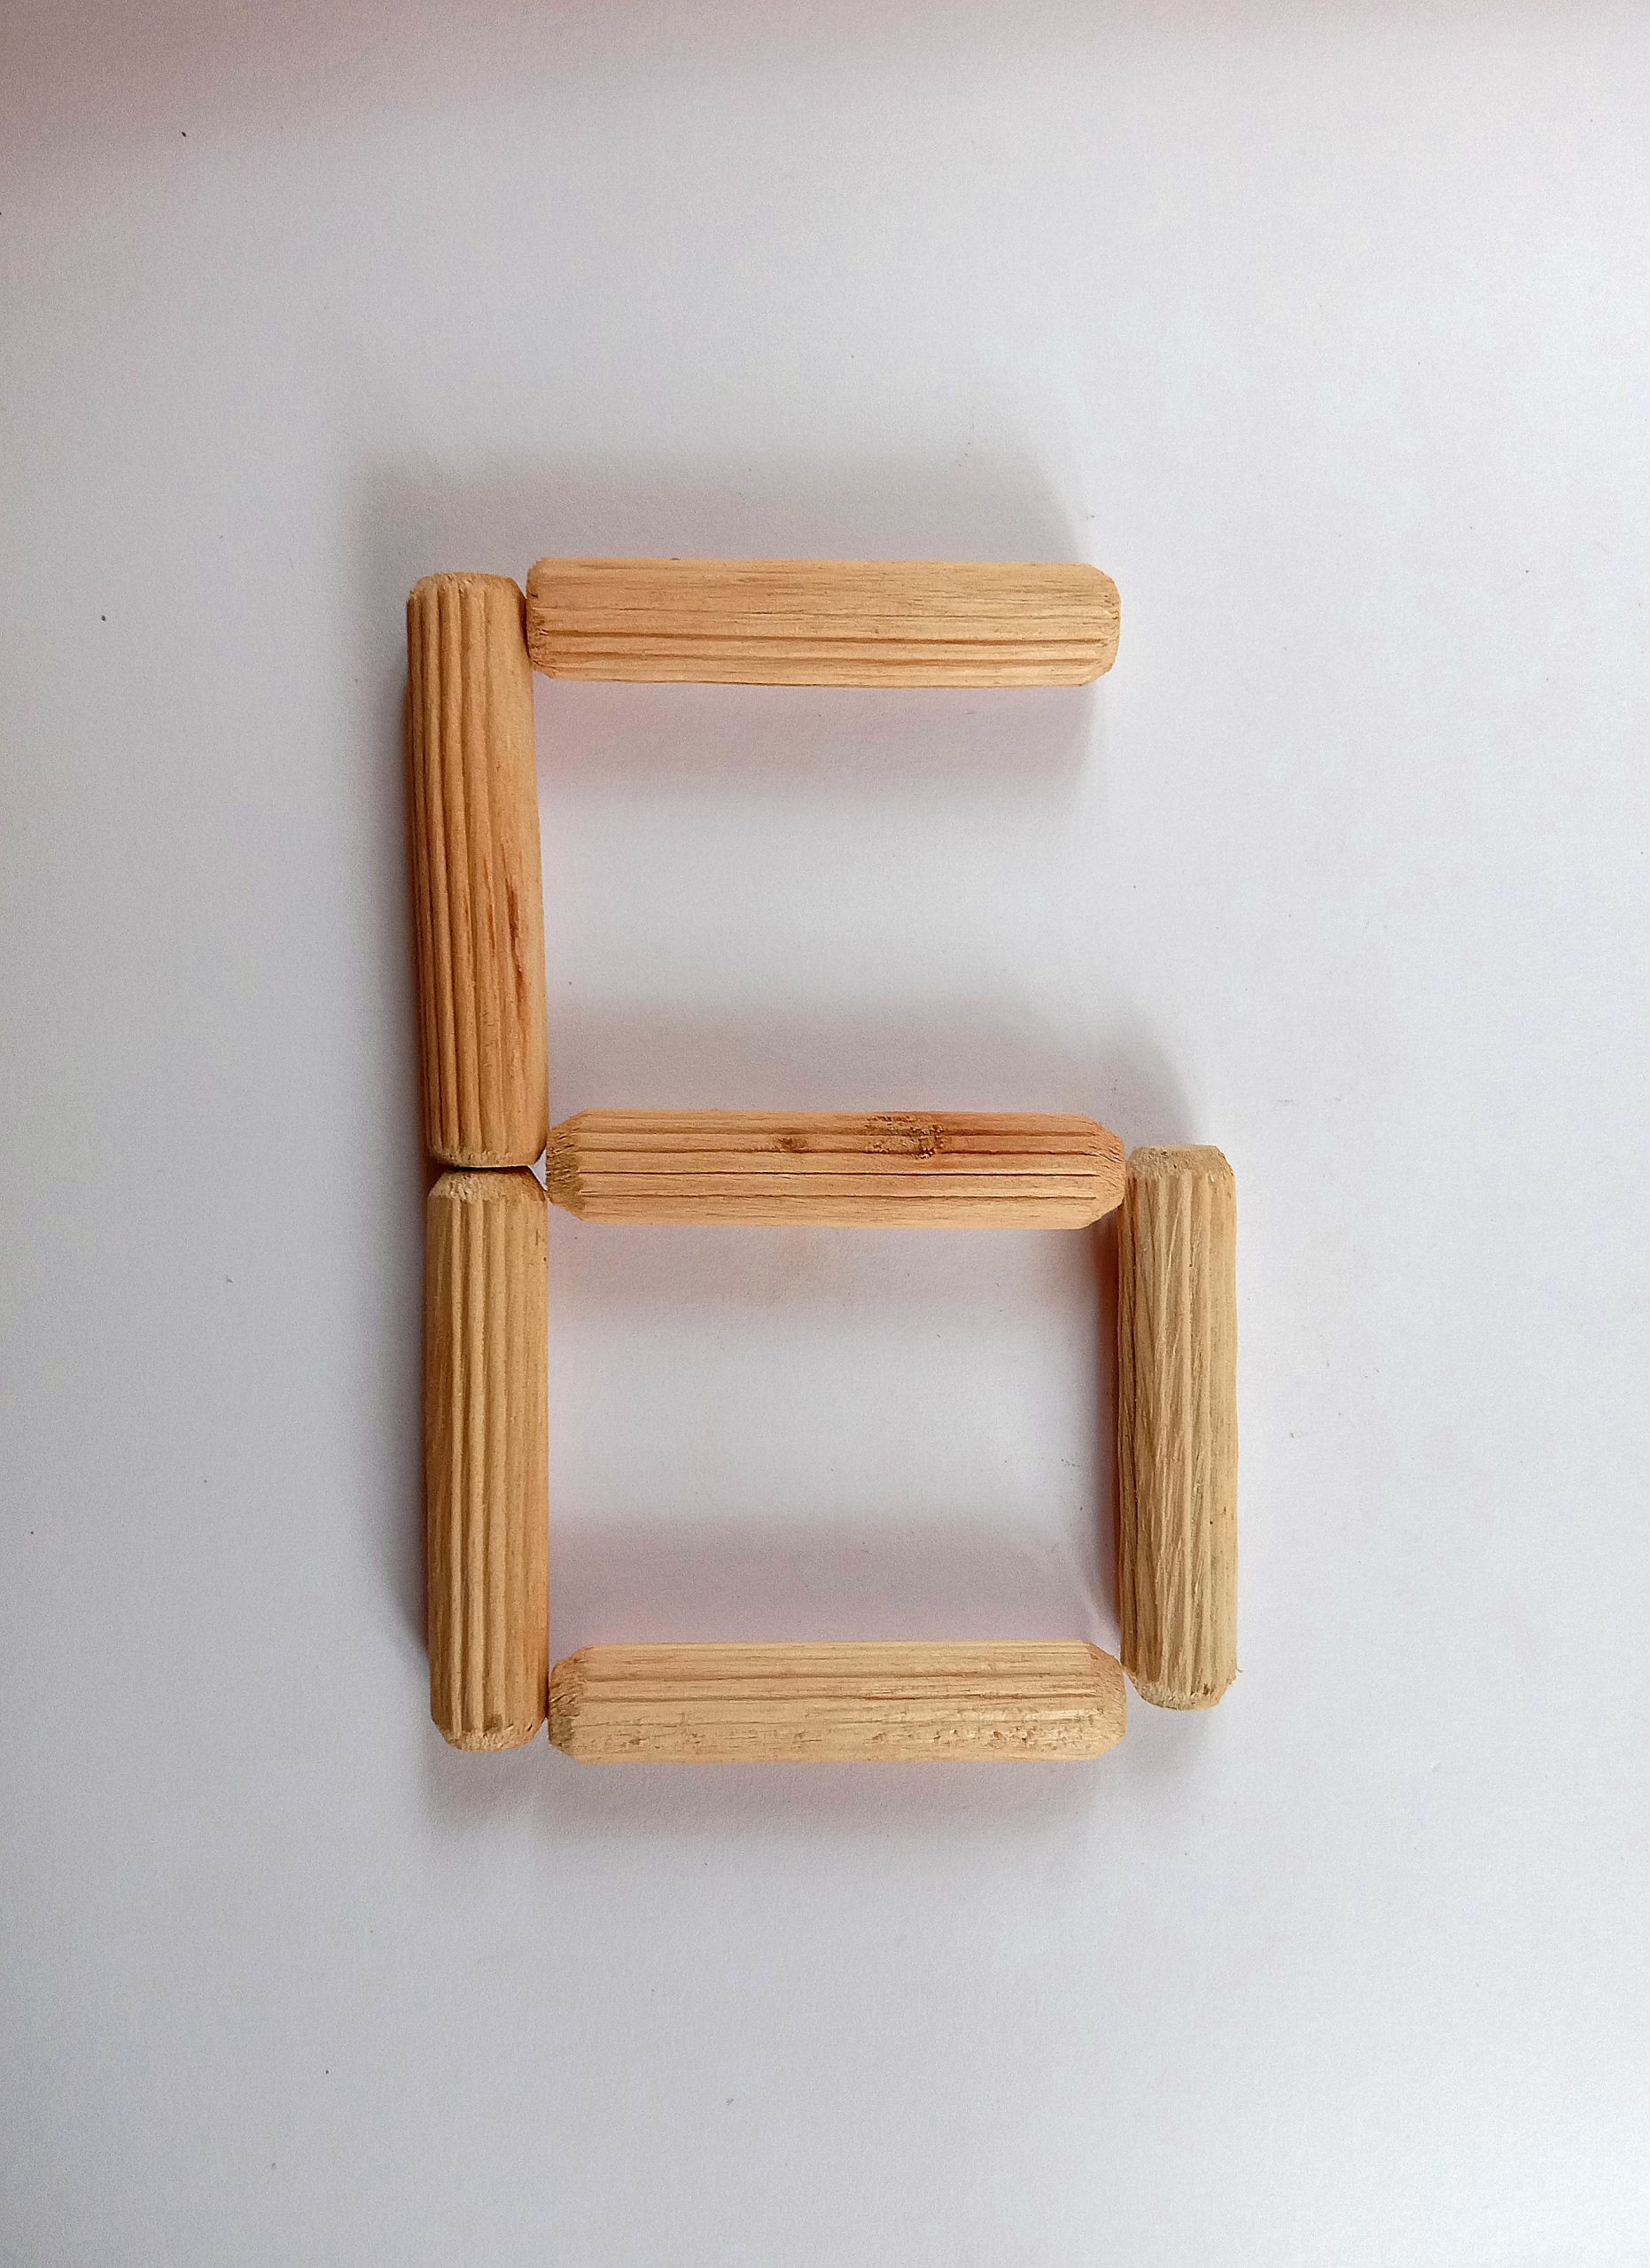 Number 6 written with sticks